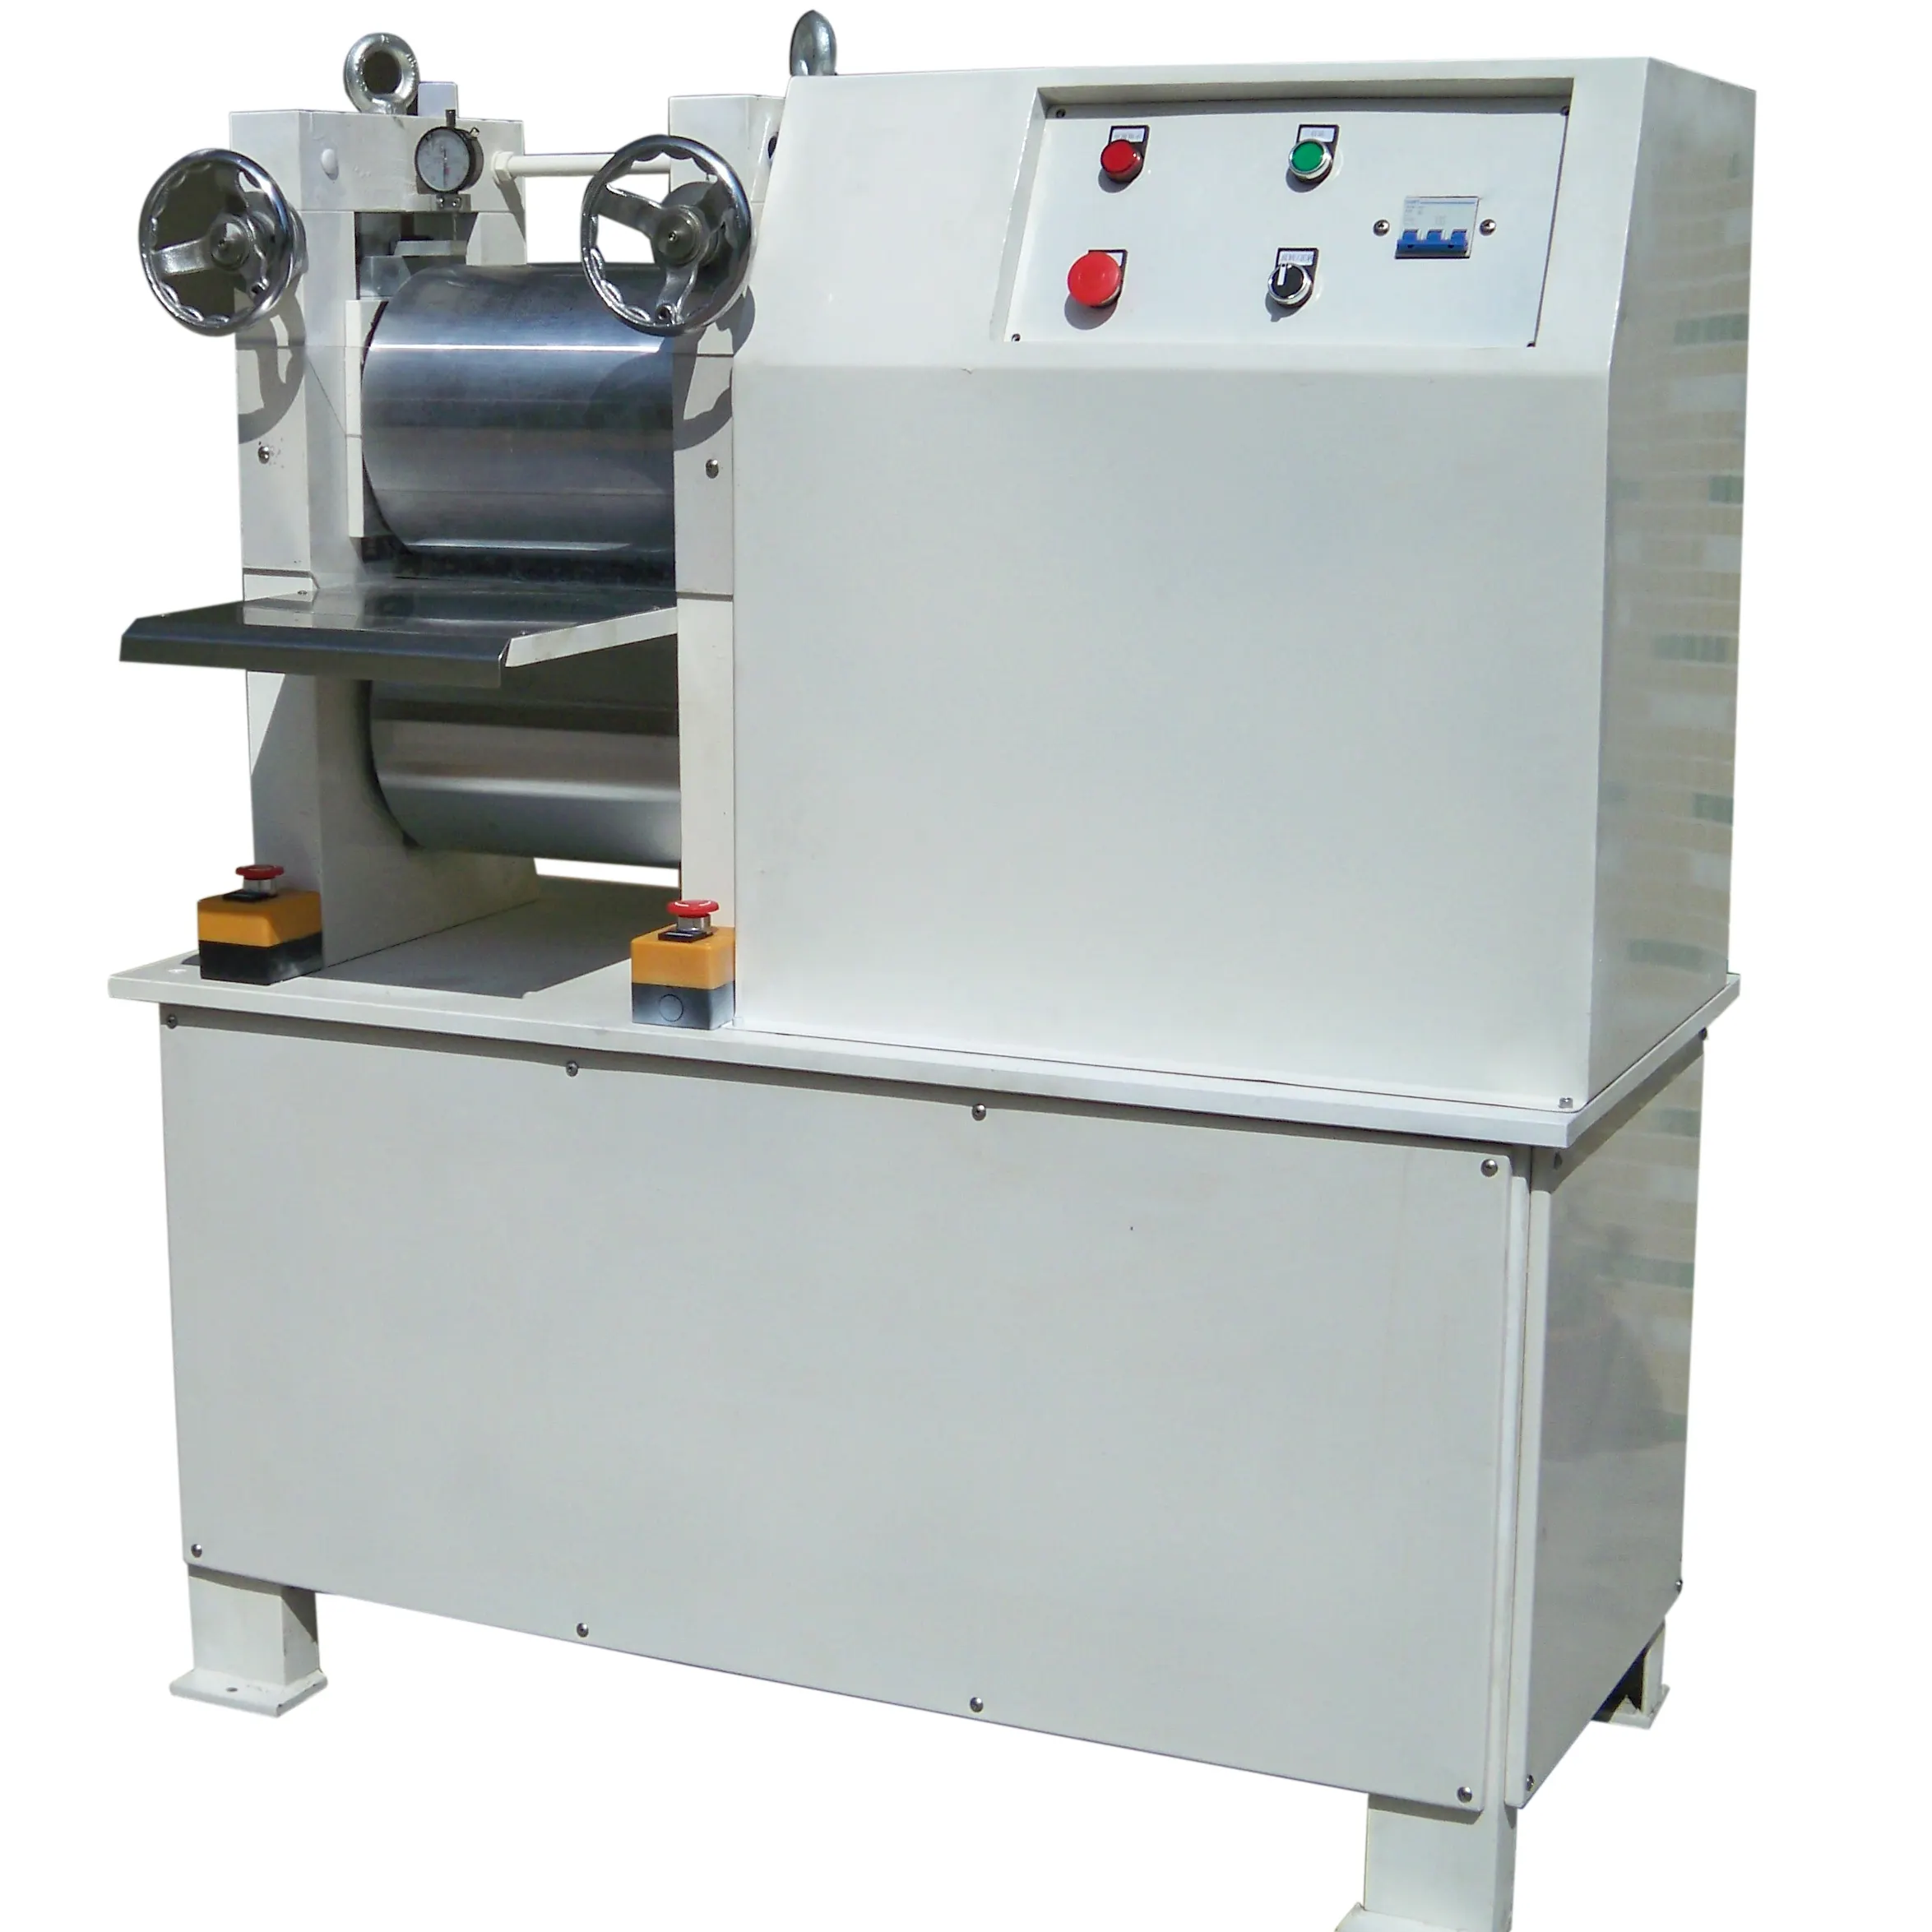 TMAX Laboratory Electric Heat Roller Press Machine For Lithium Battery Electrode Film Calendering